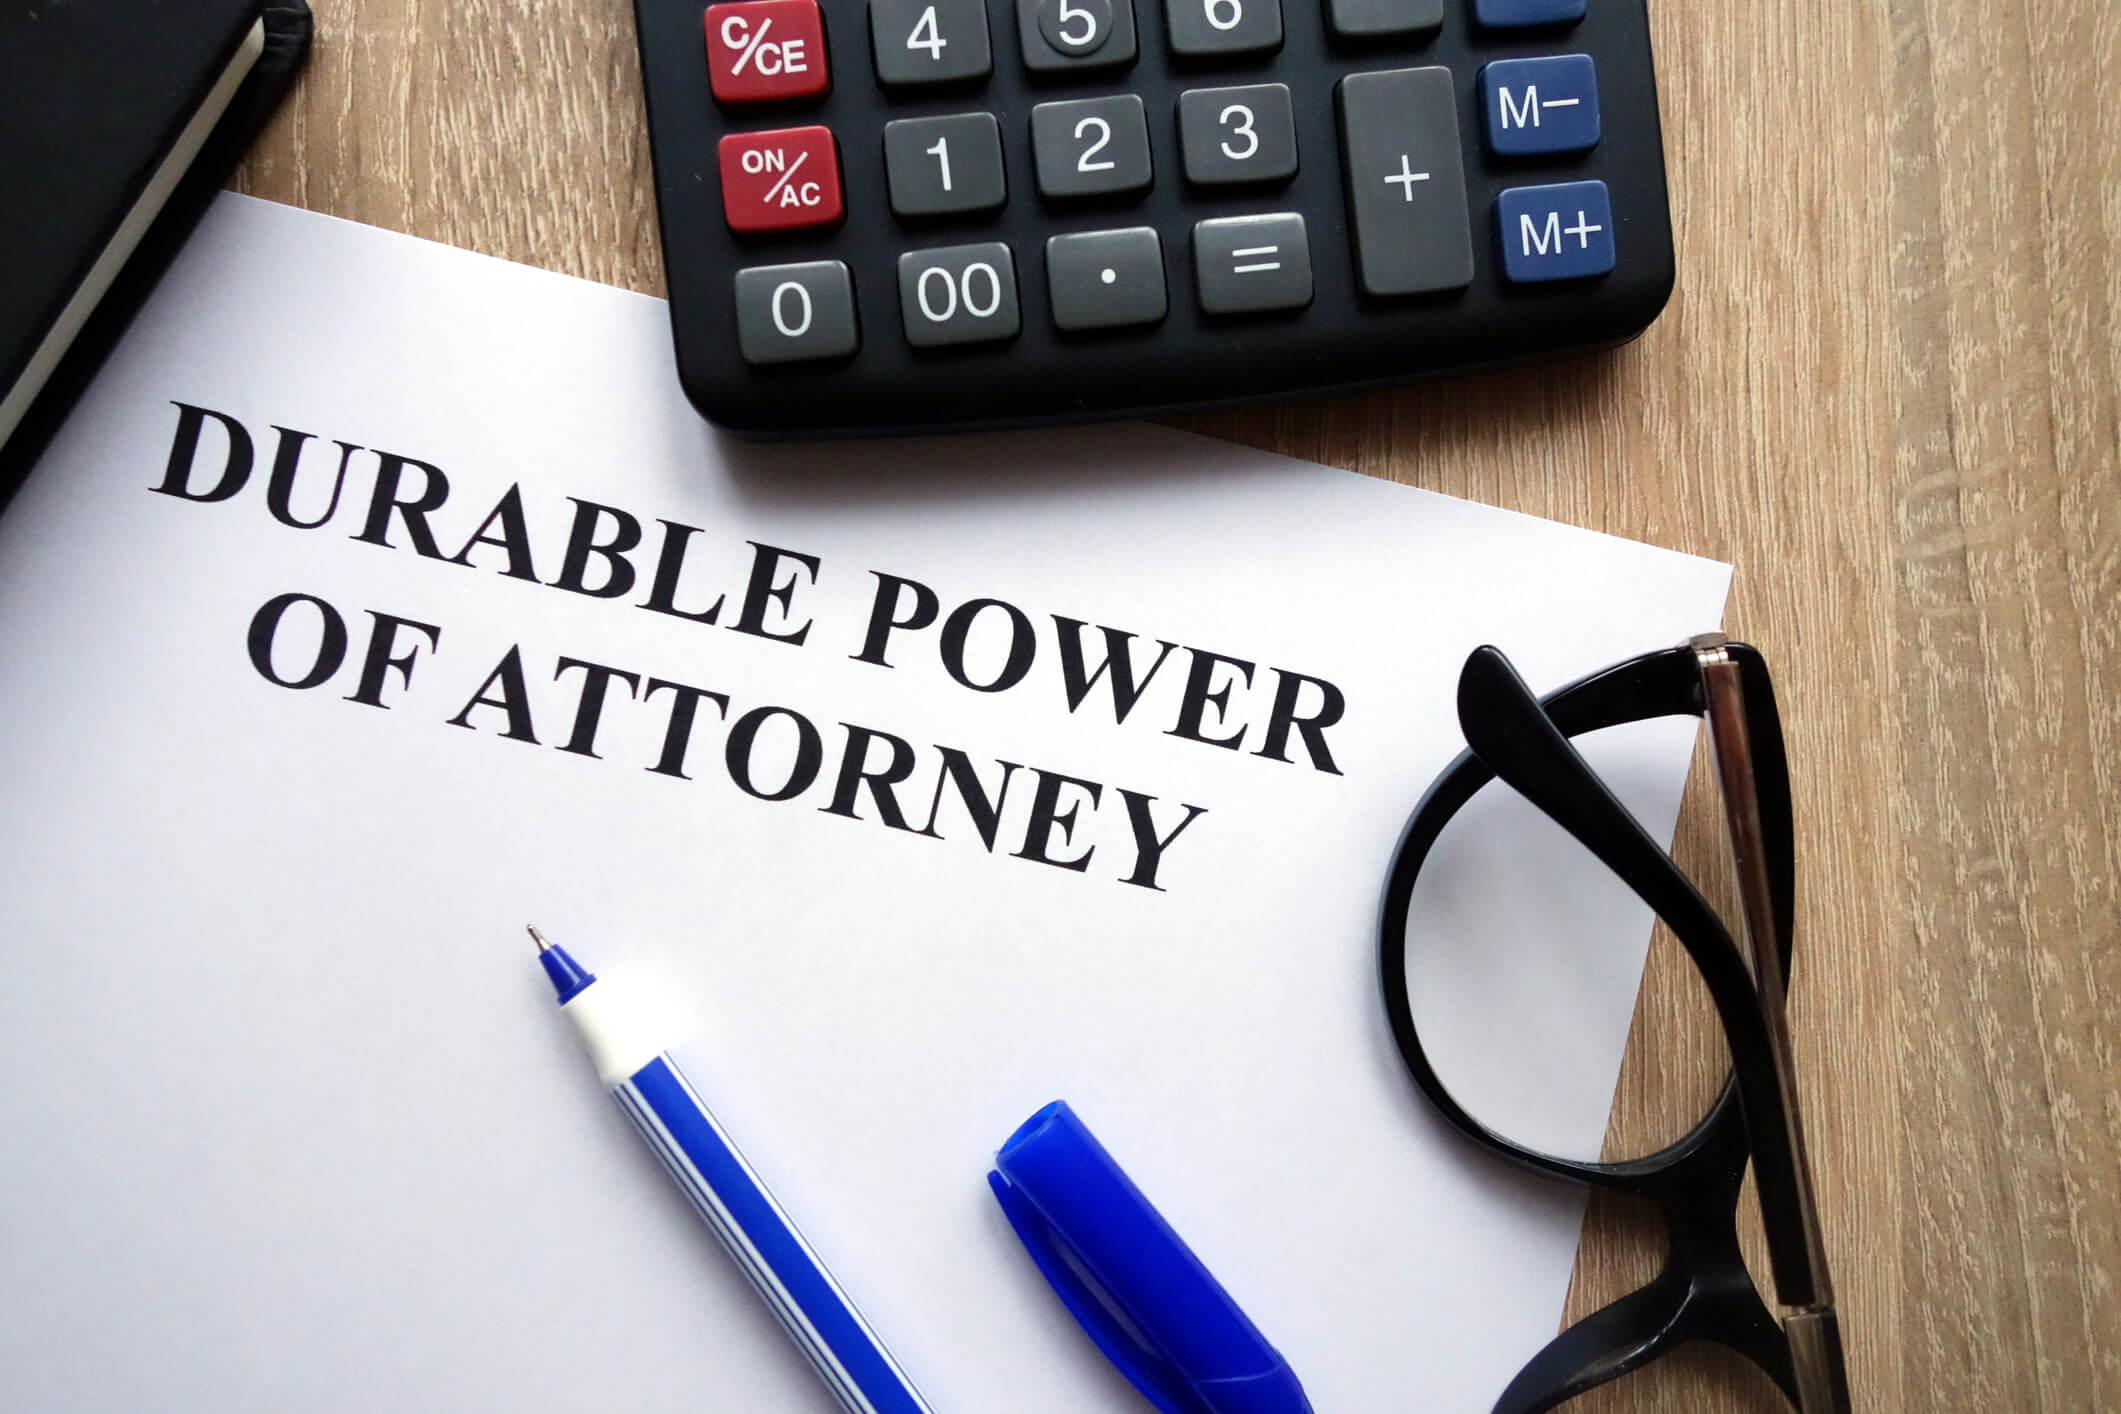 a durable power of attorney